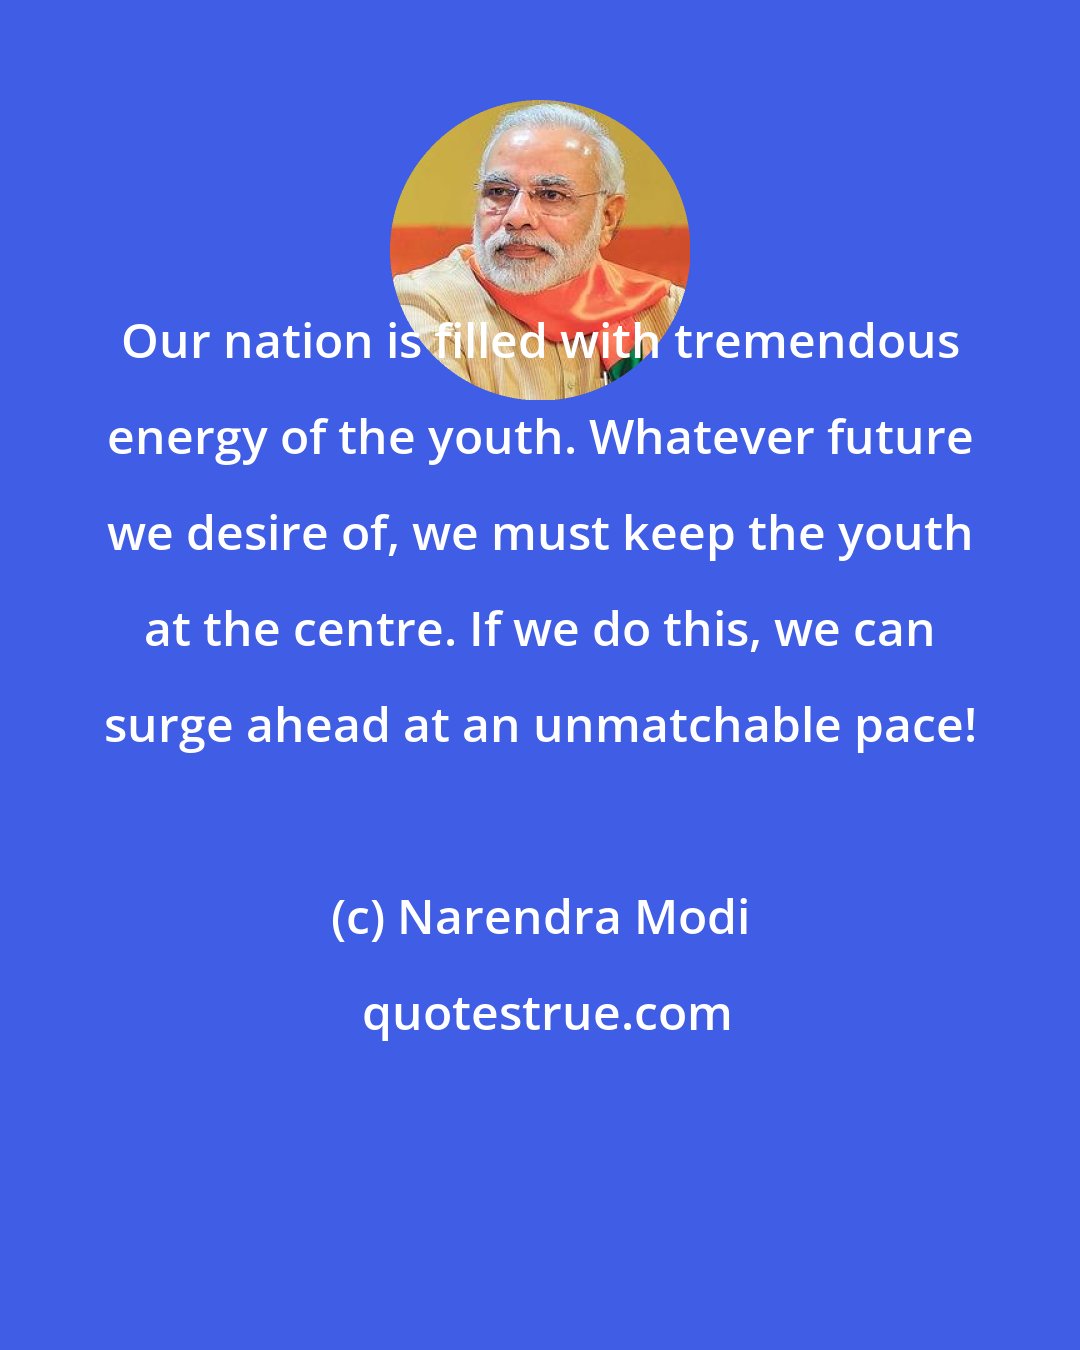 Narendra Modi: Our nation is filled with tremendous energy of the youth. Whatever future we desire of, we must keep the youth at the centre. If we do this, we can surge ahead at an unmatchable pace!